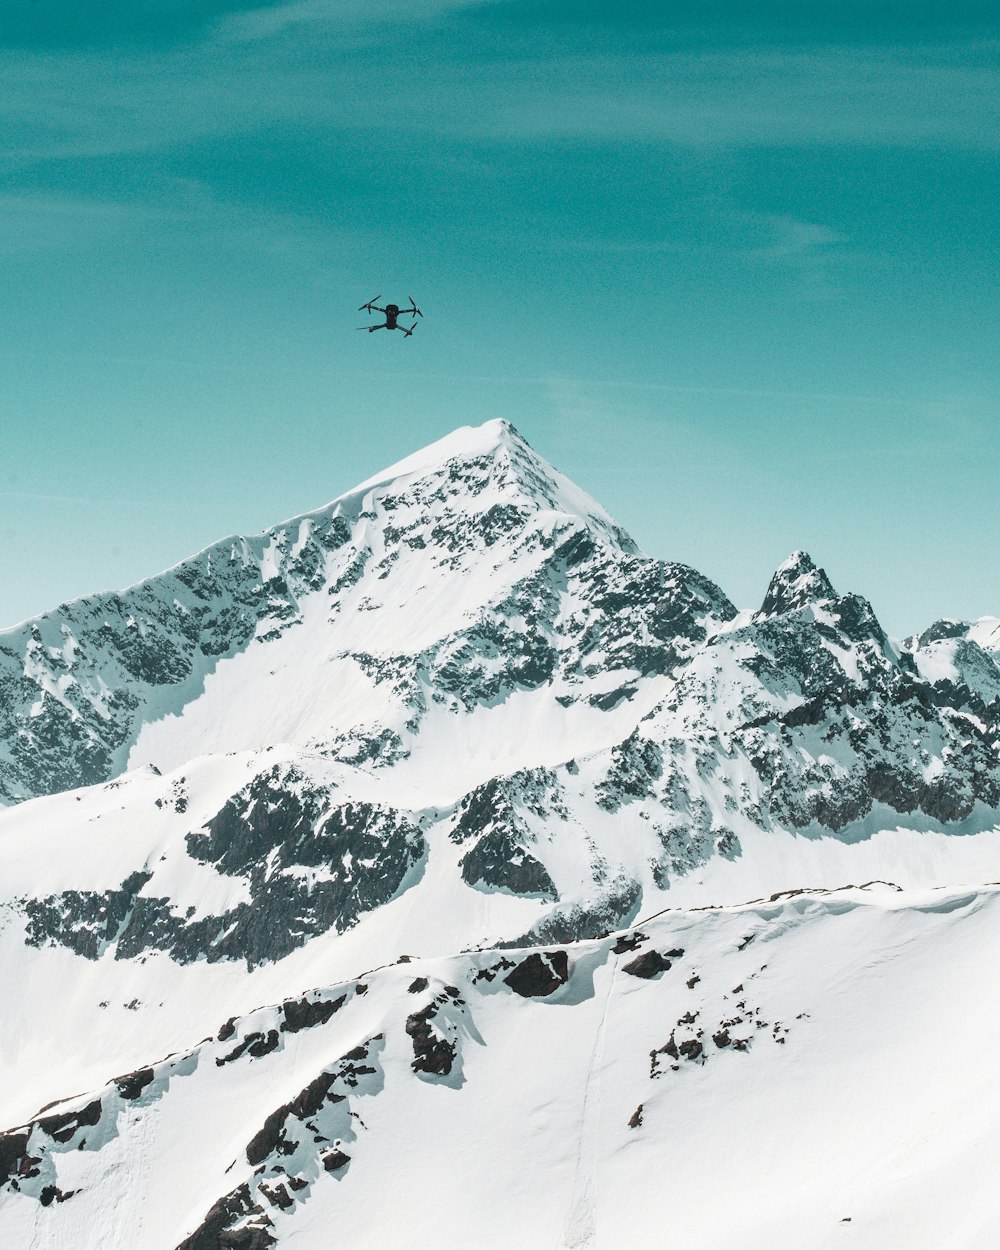 black quadcopter drone on air under mountain covered with snow